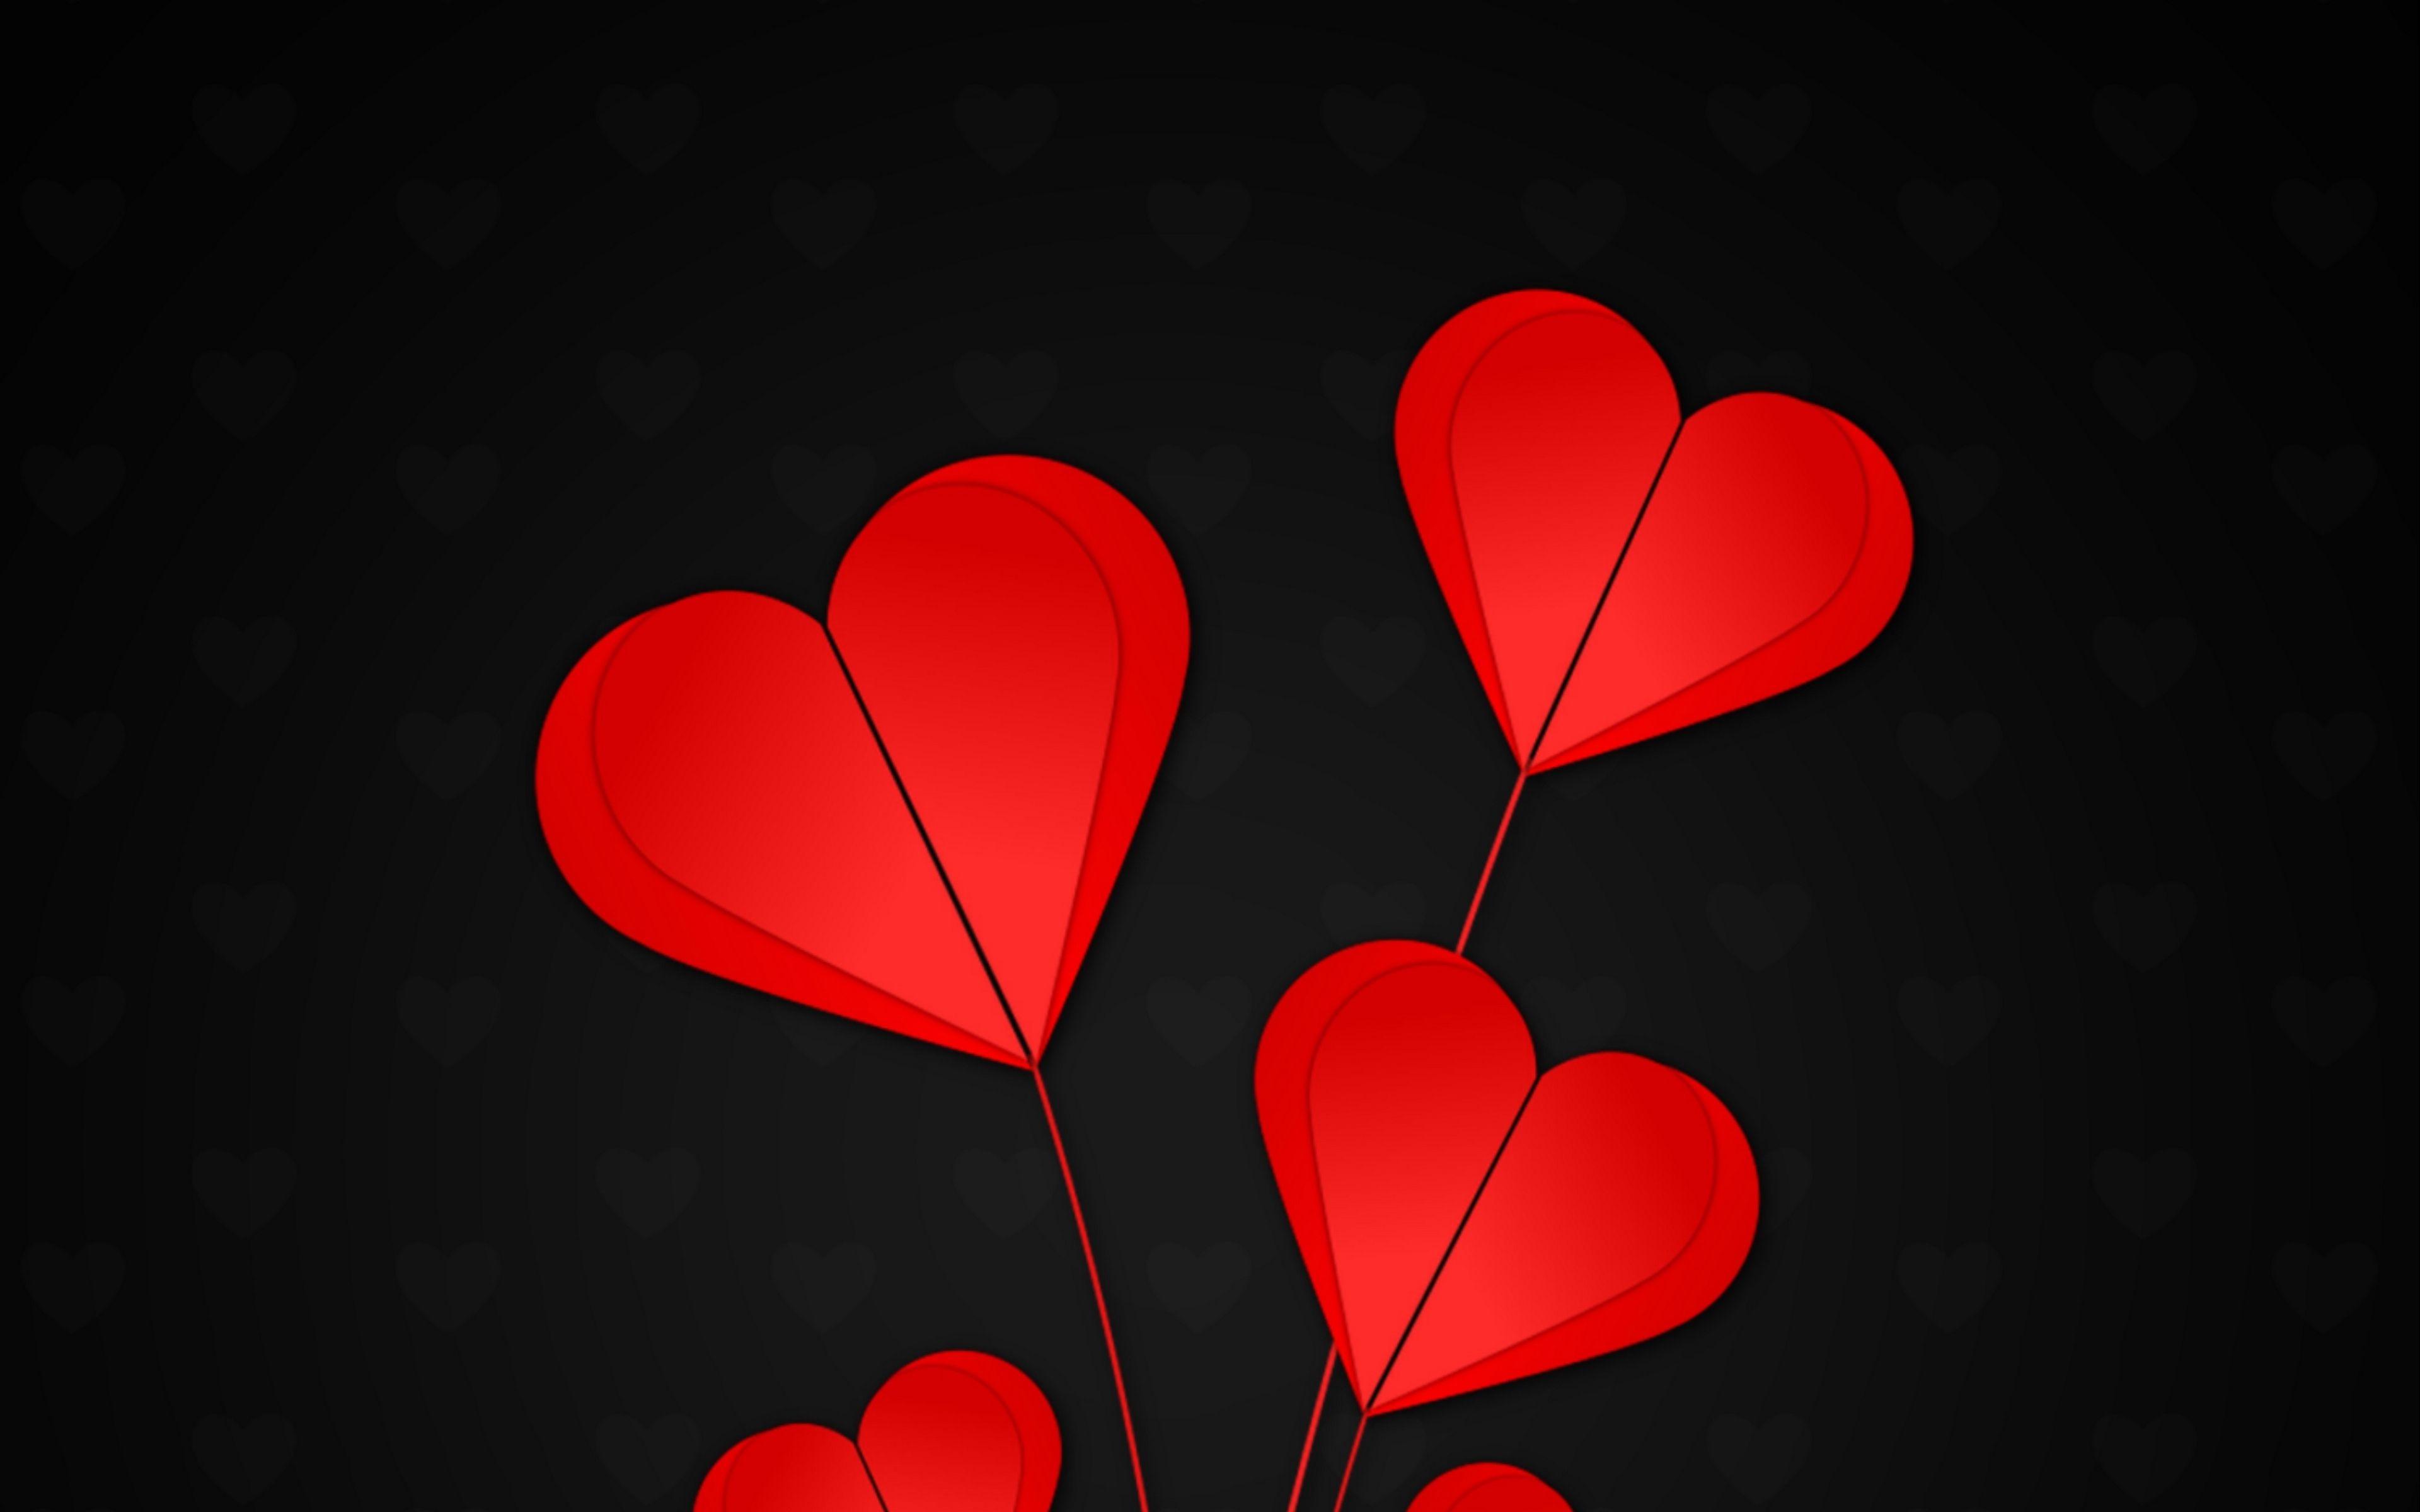 Download wallpaper 3840x2400 hearts, red, black background 4k ultra